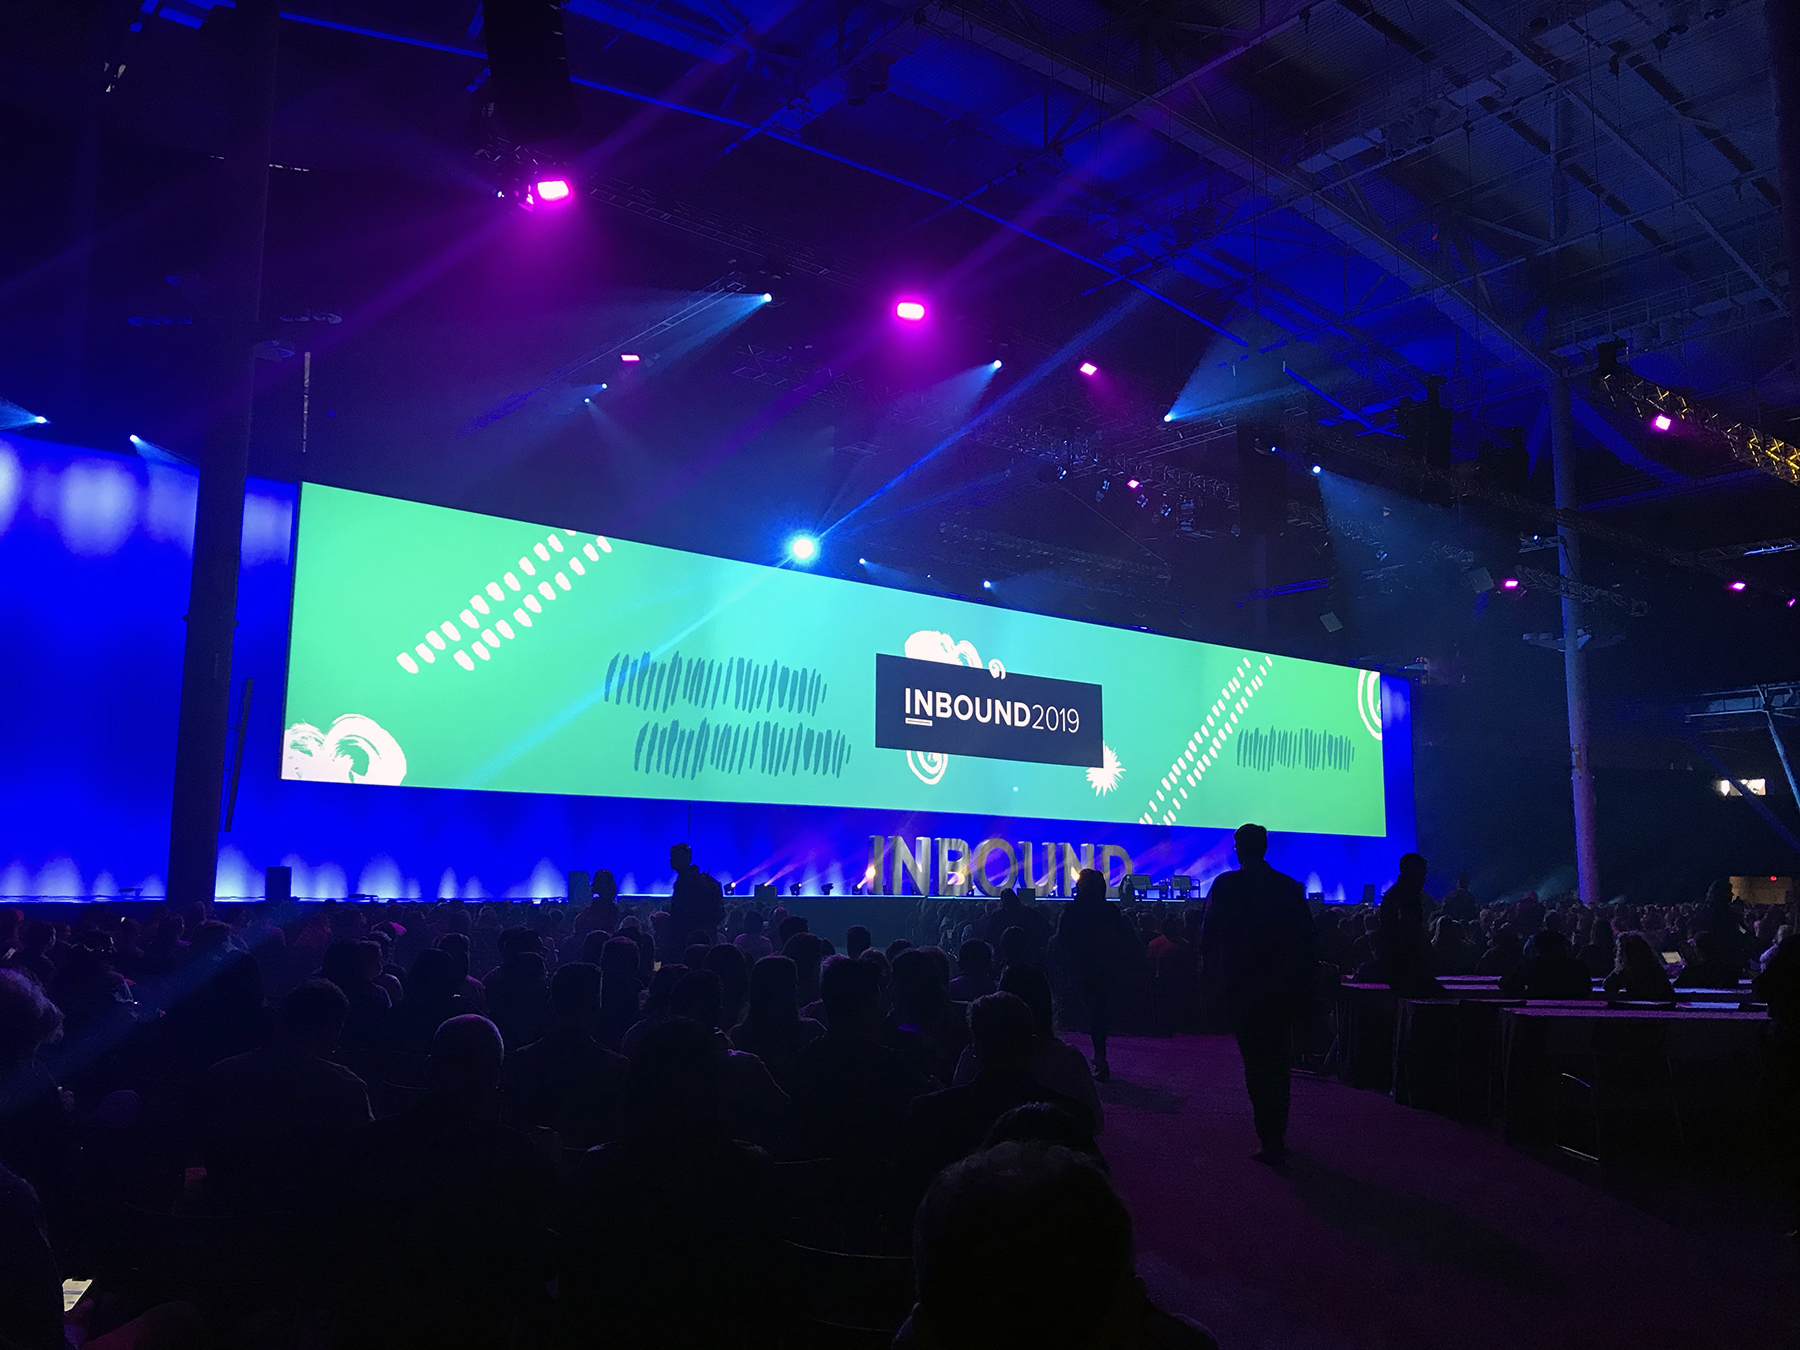 Brand Loyalty, Personas, and Tech: Our Top Takeaways From Inbound 2019